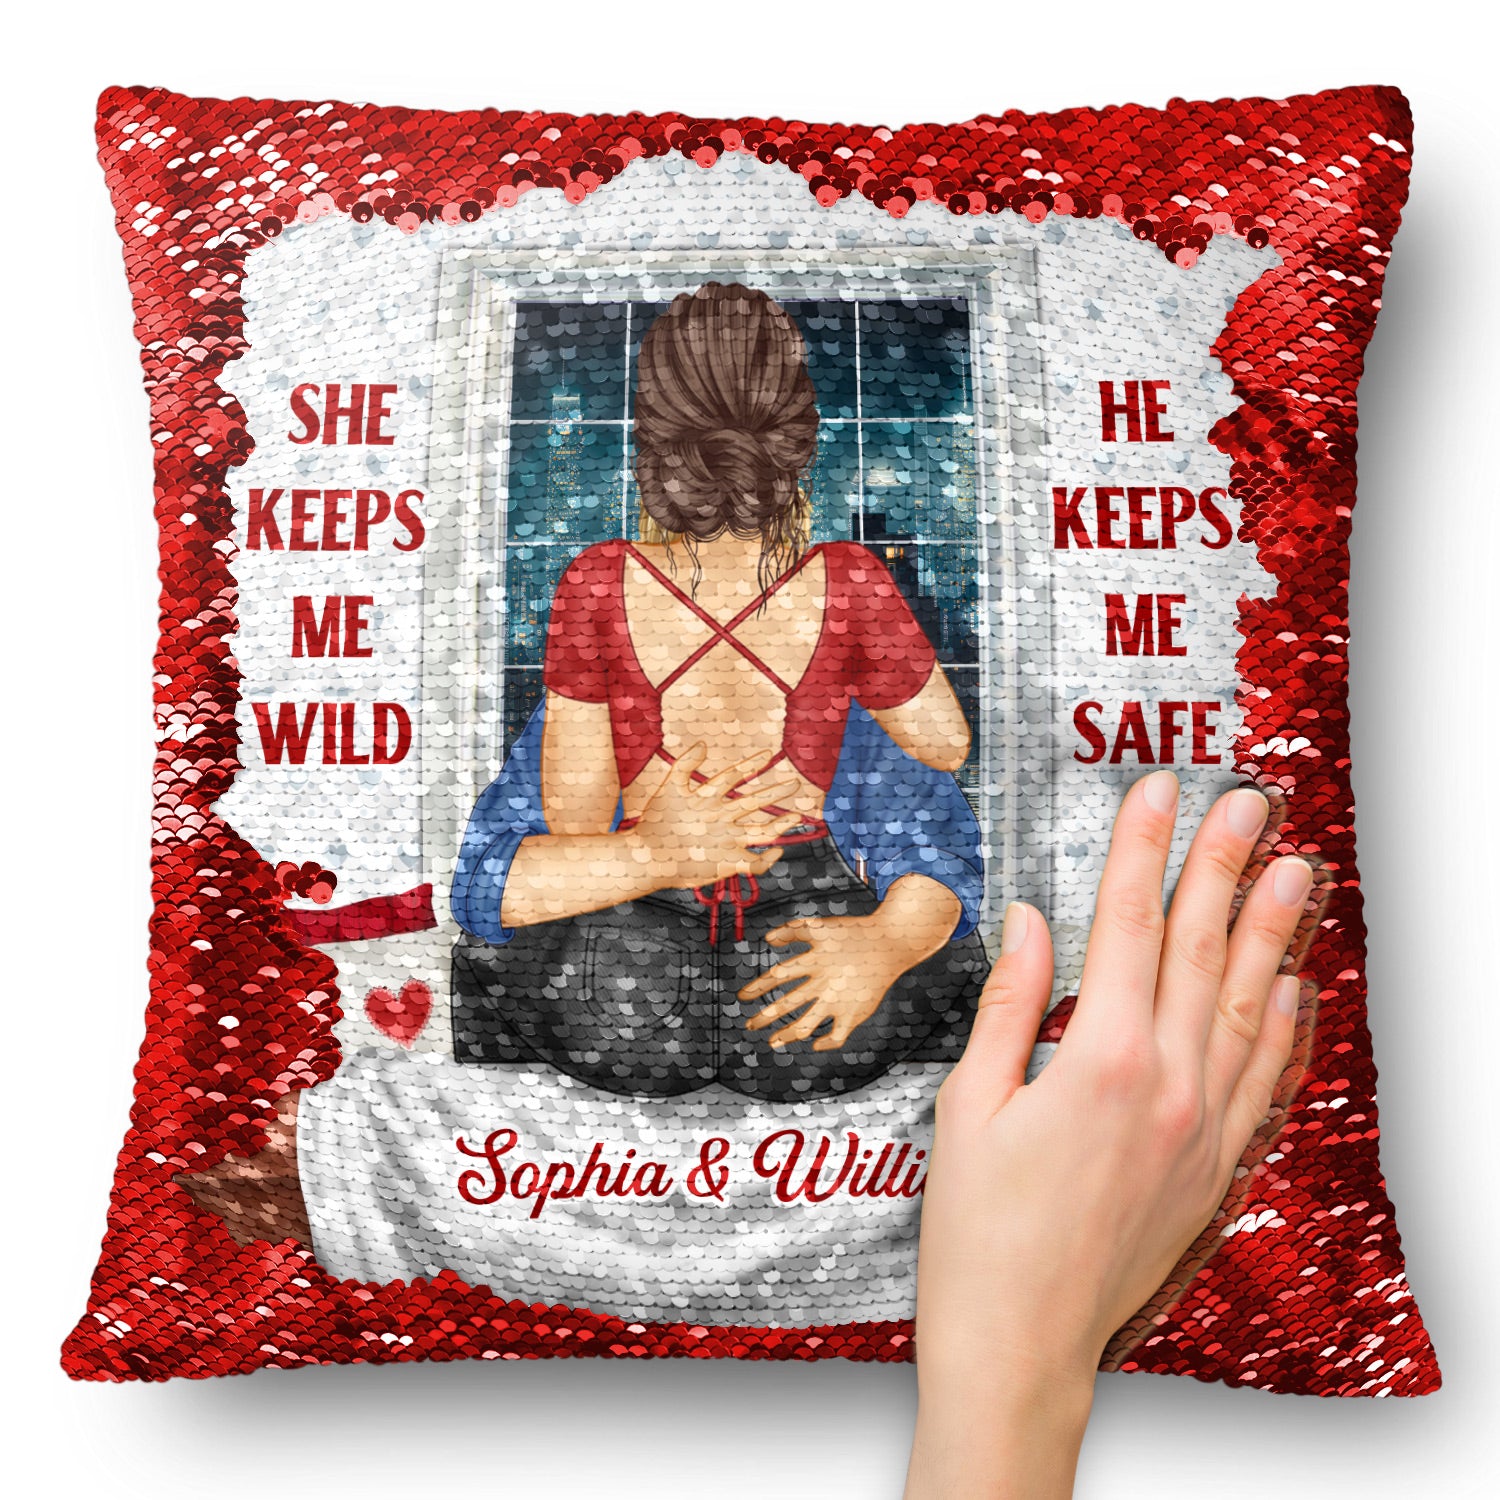 She Keeps Me Wild He Keeps Me Safe - Gift For Couples, Husband And Wife - Personalized Sequin Pillow, Mermaid Sequin Cushion Magic Reversible Throw Pillow